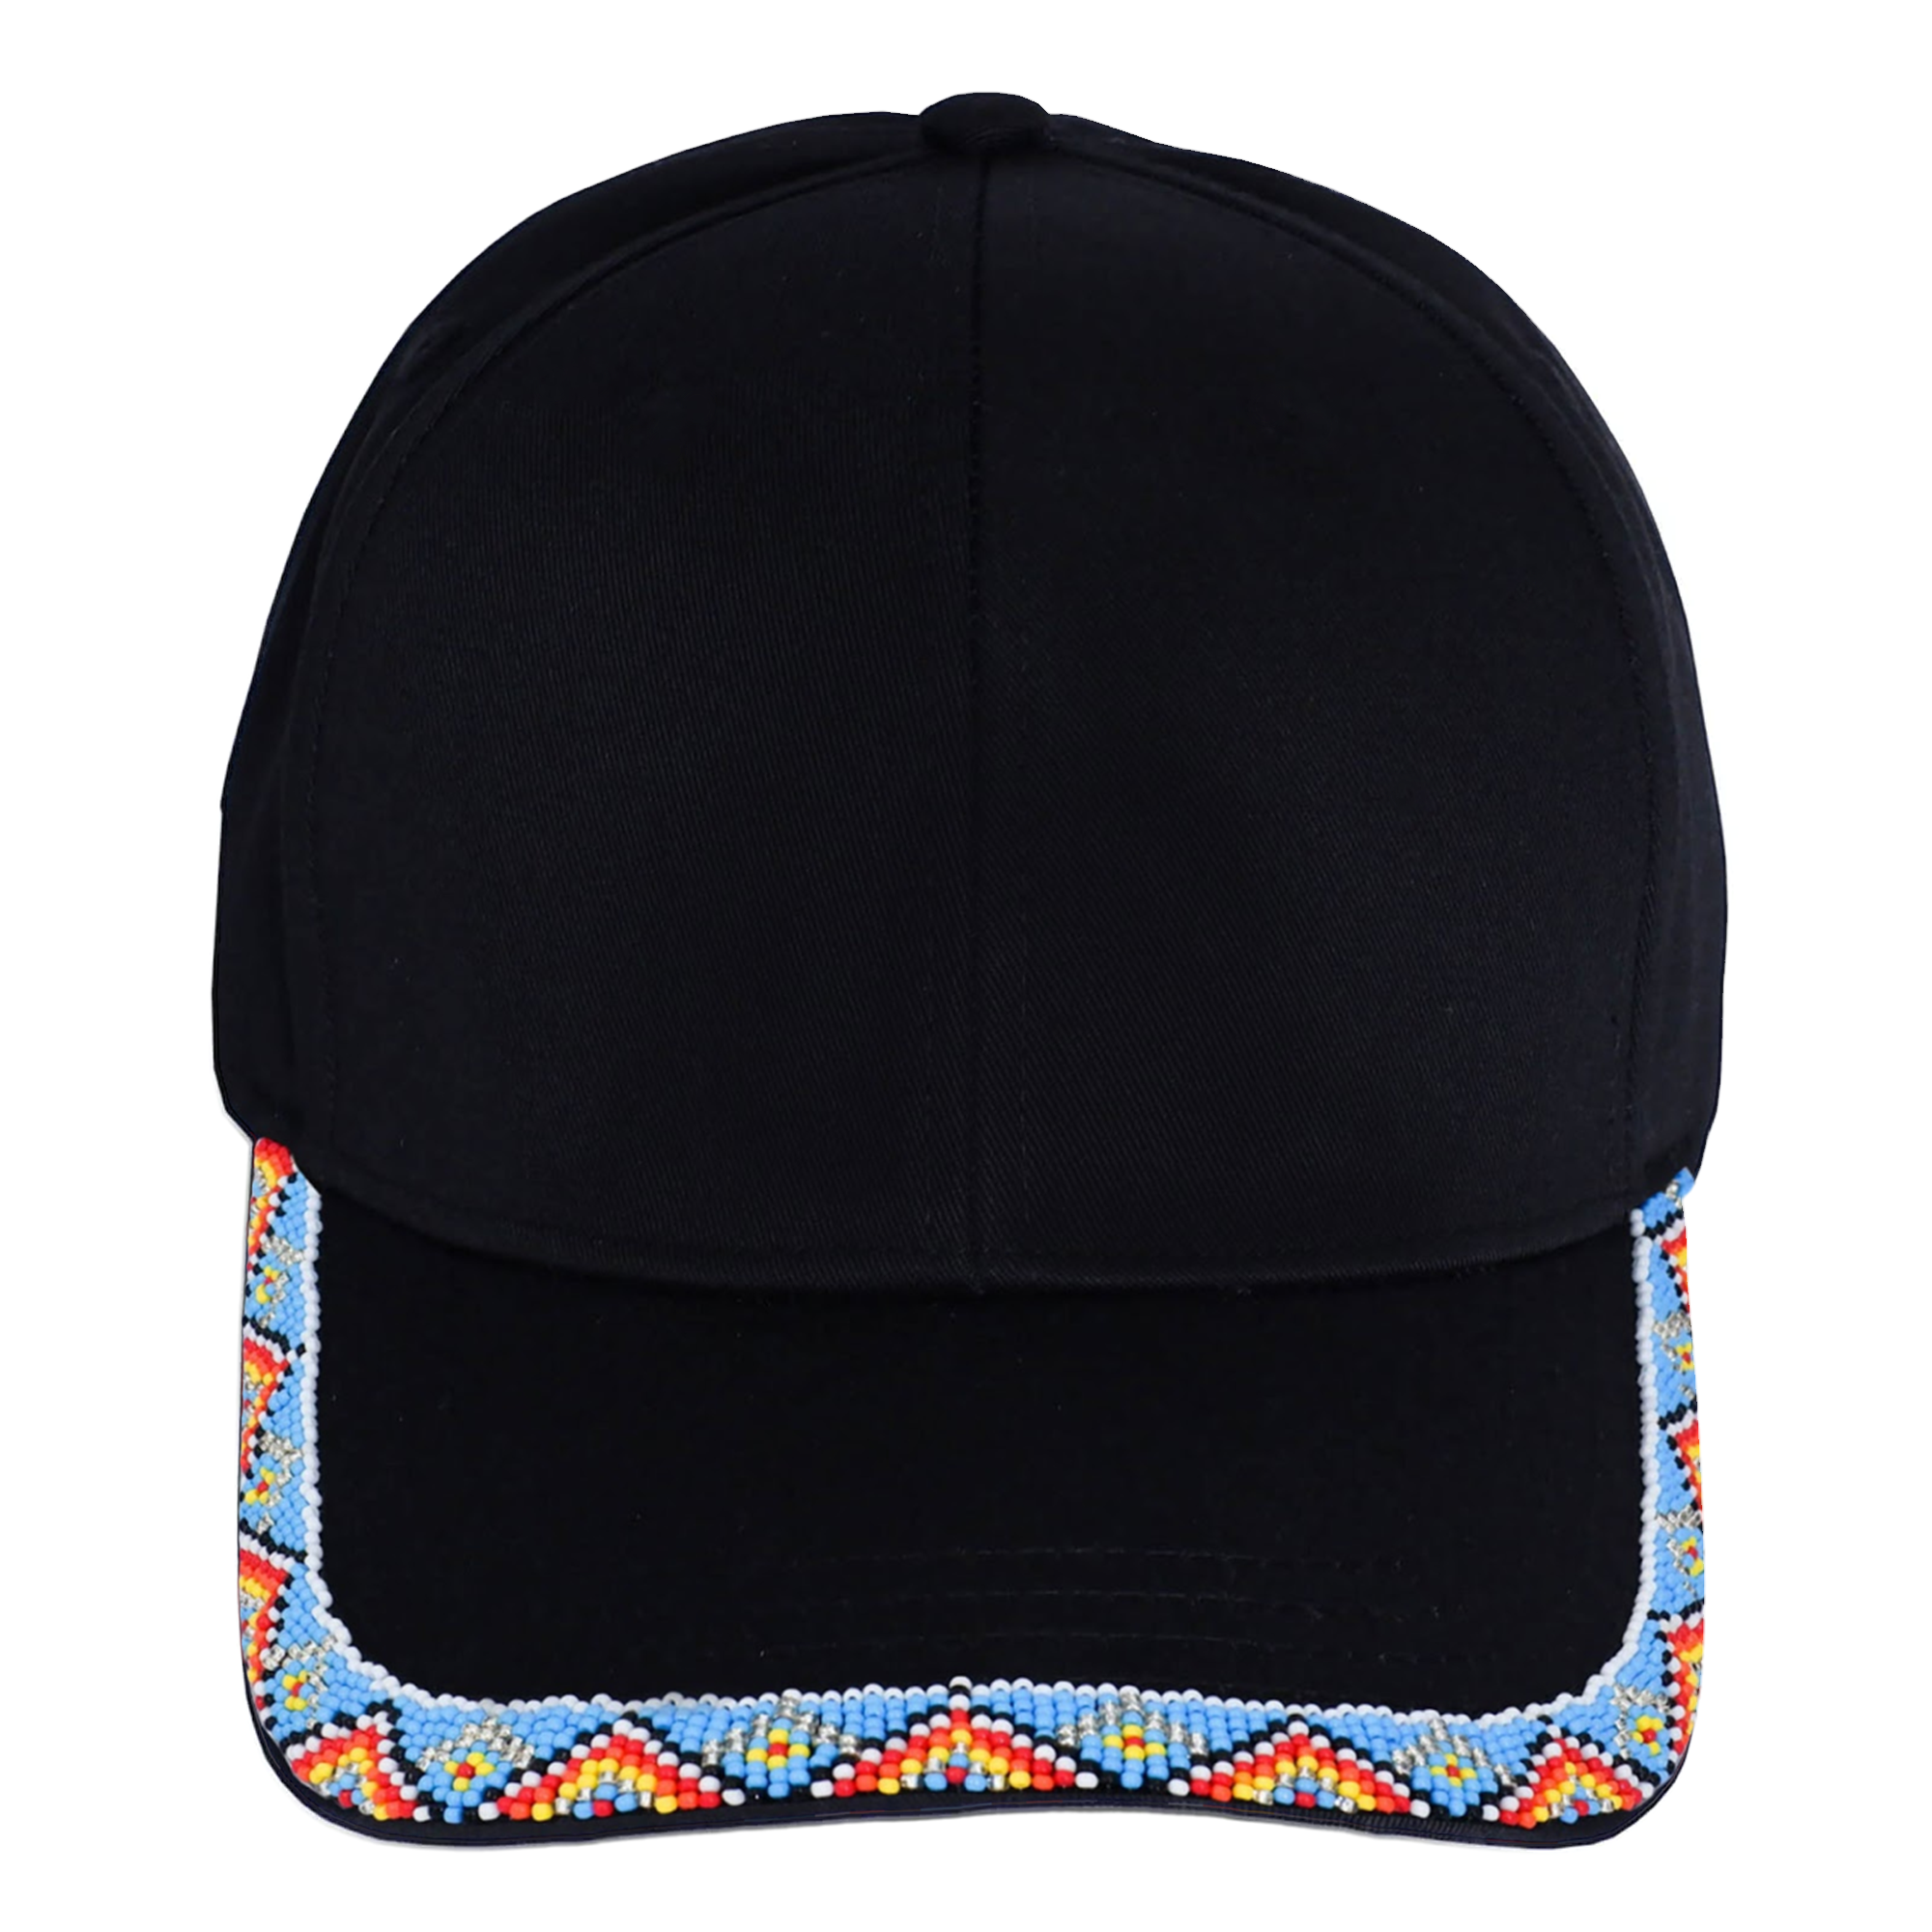 SALE 50% OFF - Baseball Cap With A Colorful Beaded Brim Cotton Unisex Native American Style